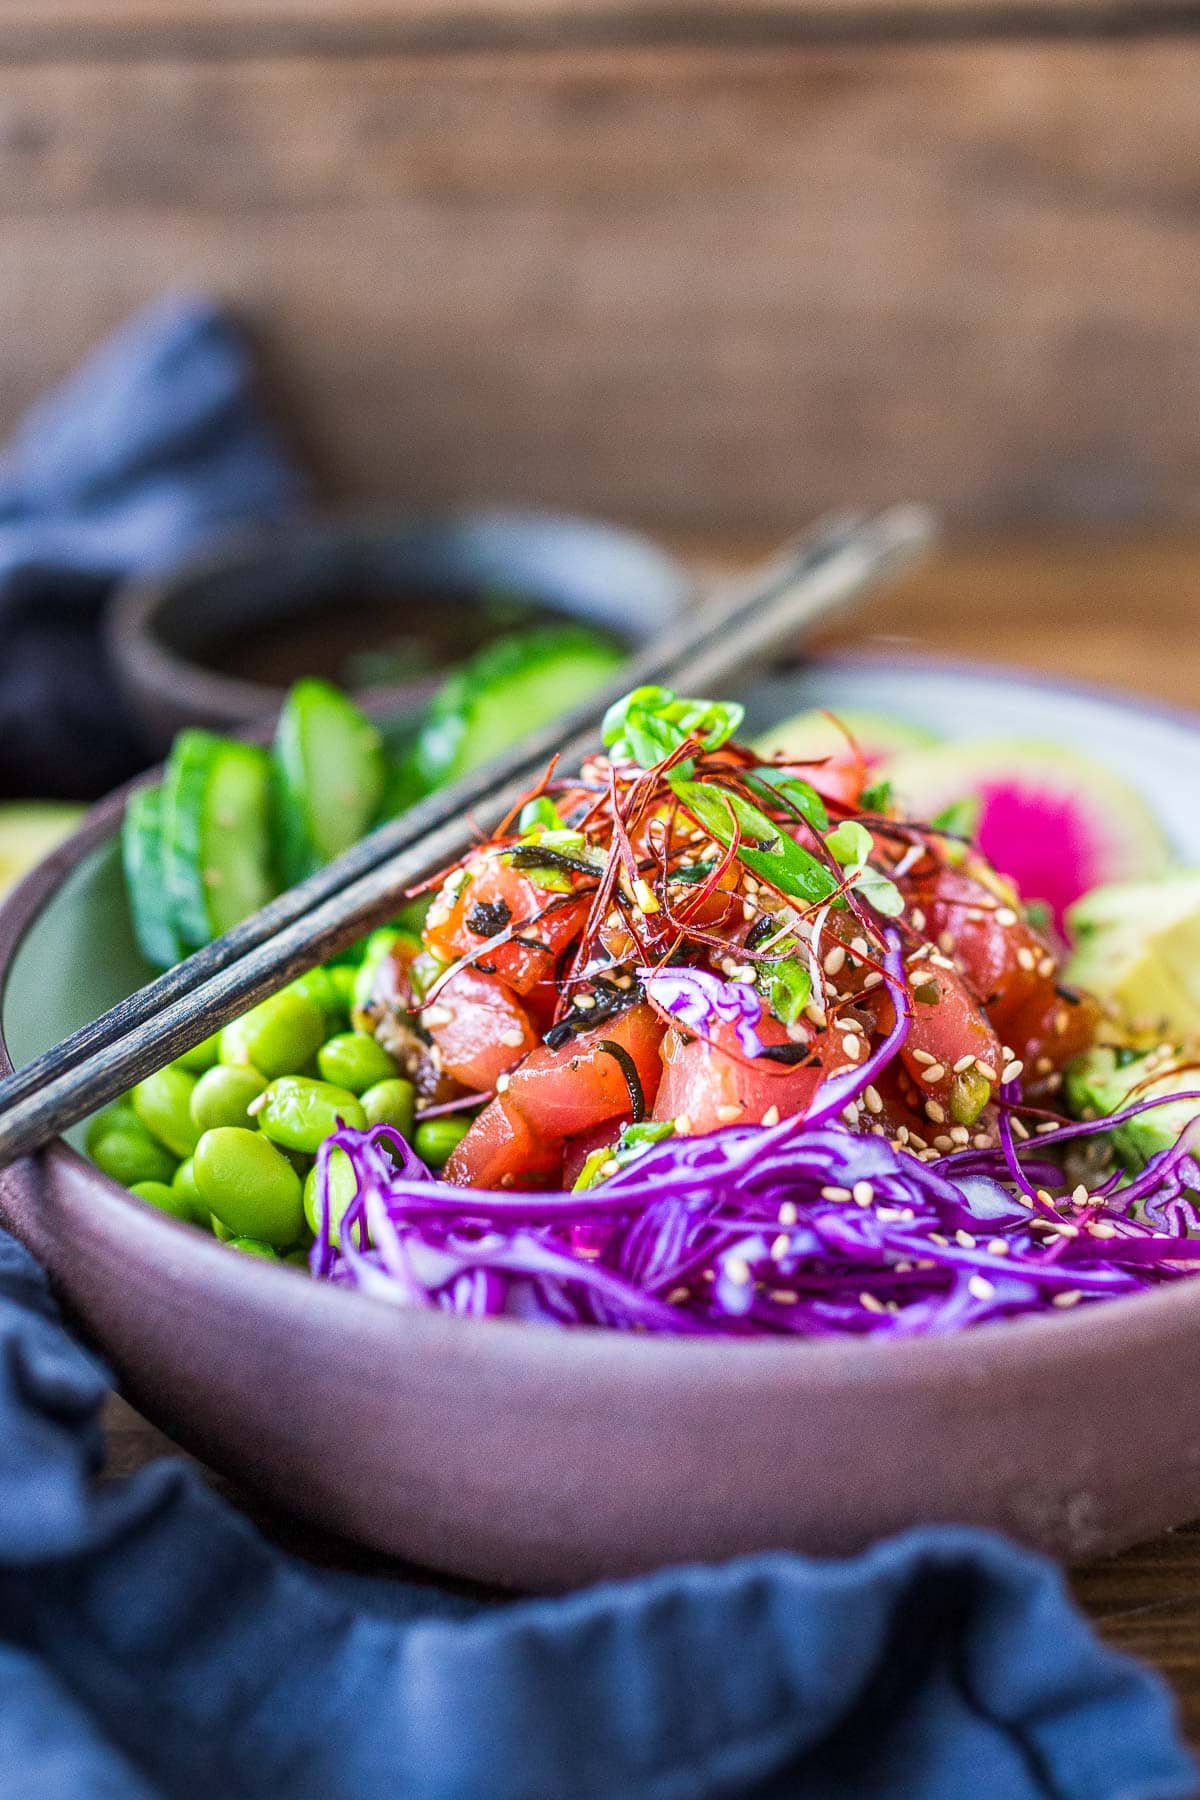 How to make homemade Poke Bowls with fresh ahi tuna, avocado, cucumbers, shredded cabbage, edamame, and rice, with a bright and flavorful Poke dressing.